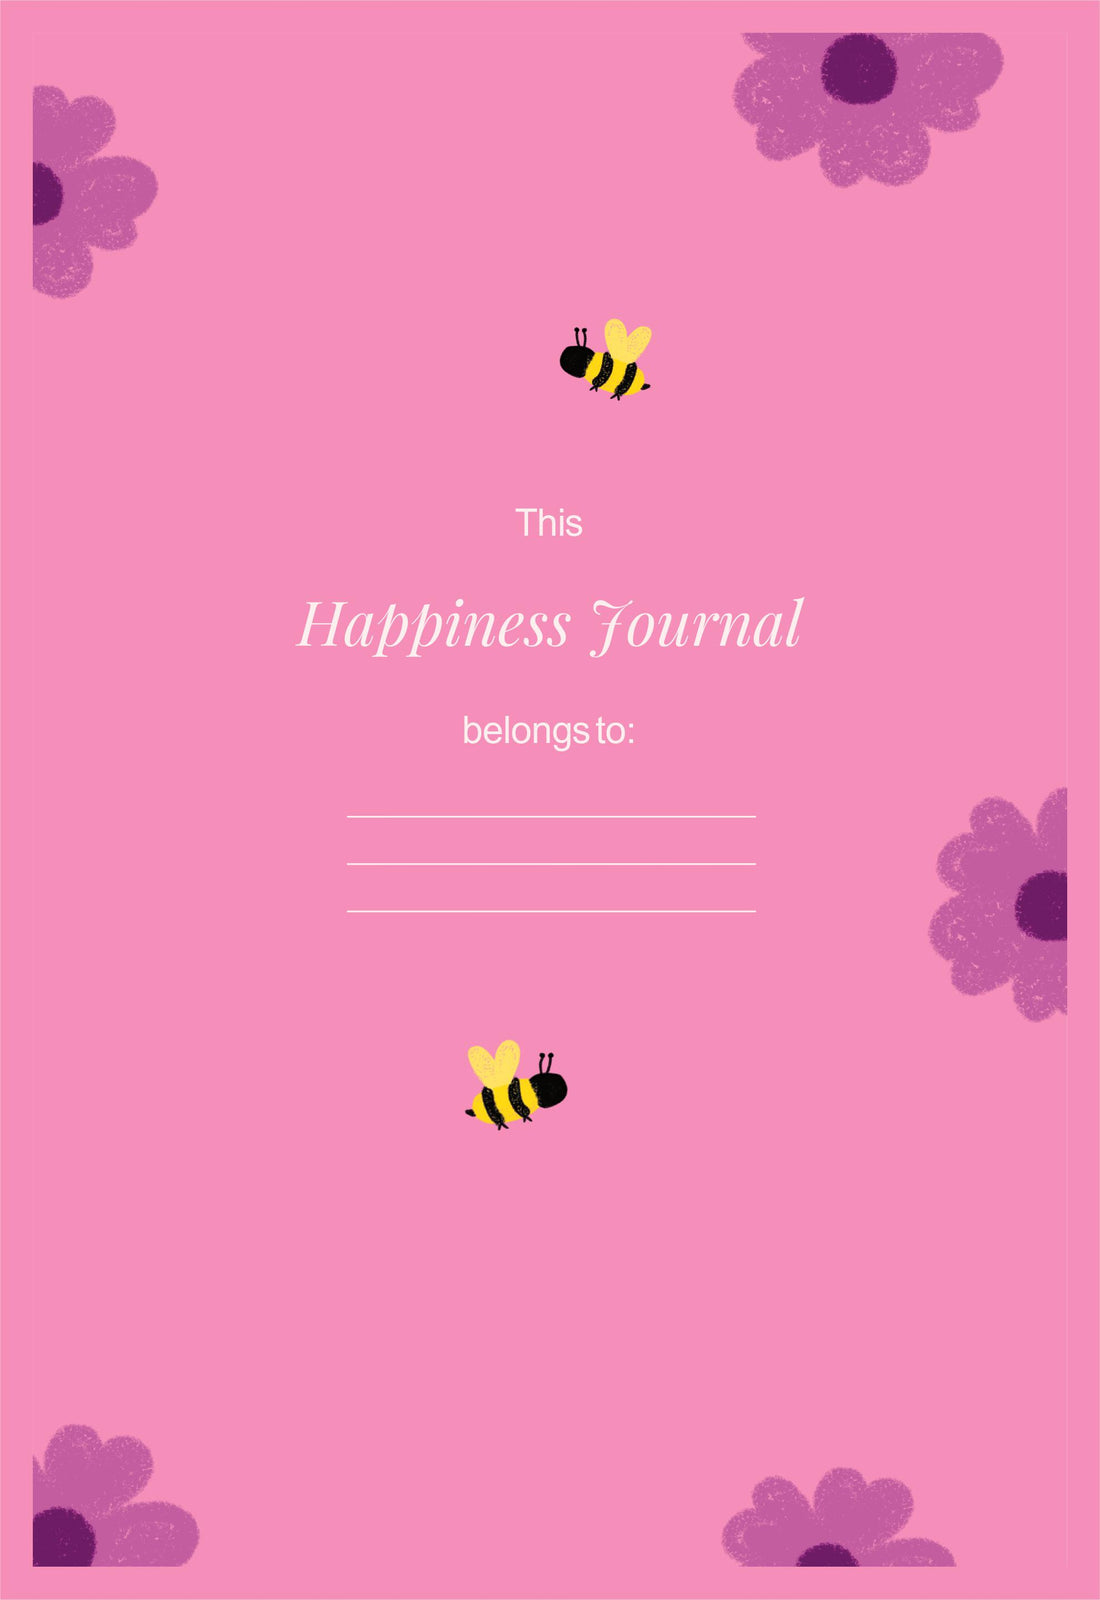 My Happiness Journal